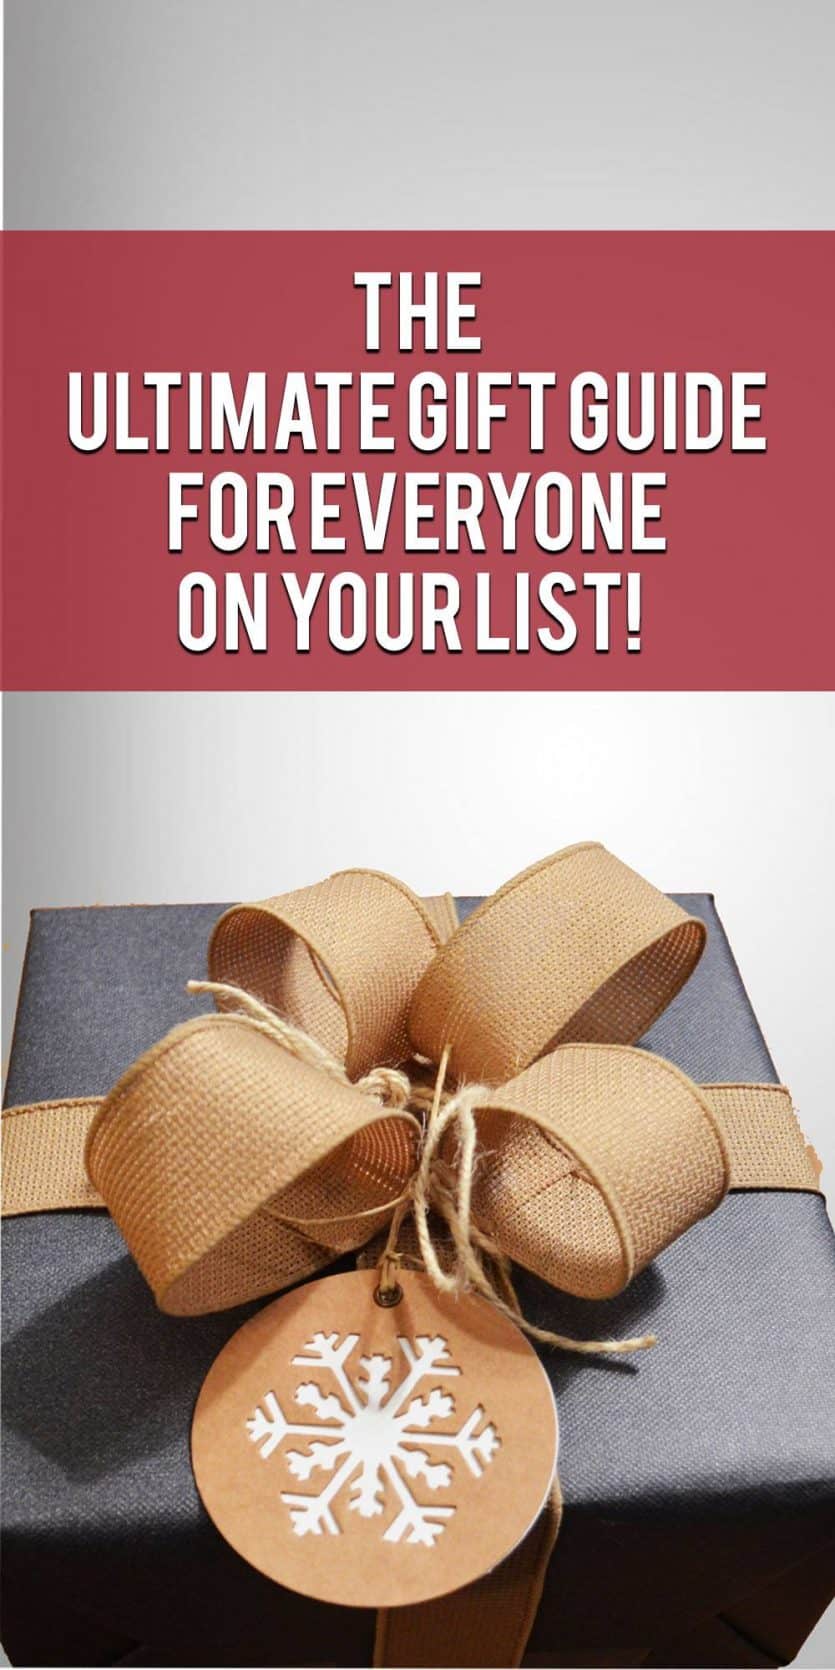 All kinds of great gift ideas for yourself or someone on your holiday shopping list this year. Check it out and make your shopping easier this year! Pin it so you won't forget it!